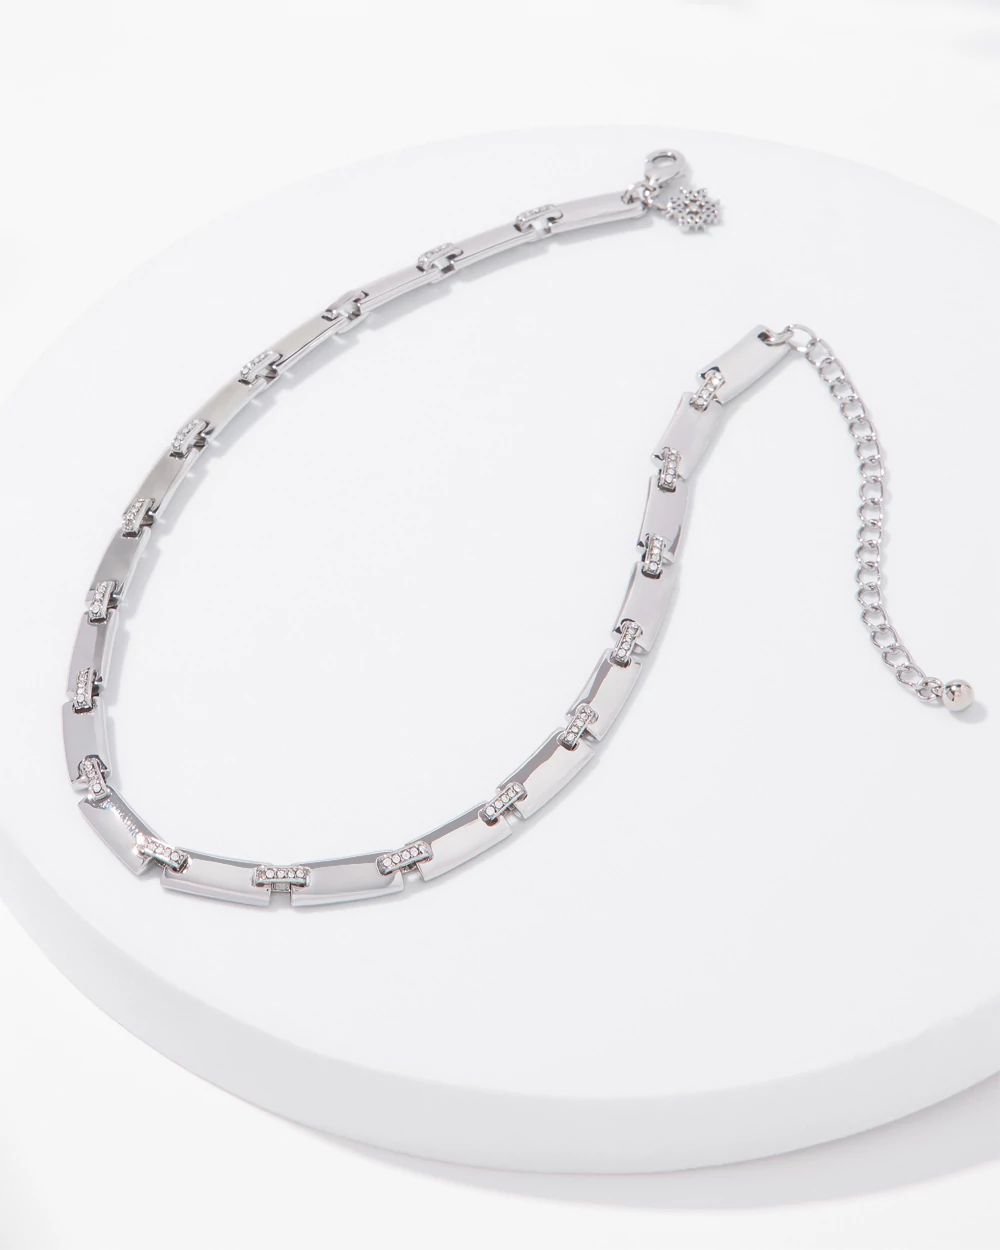 Silver Pave Link Necklace click to view larger image.